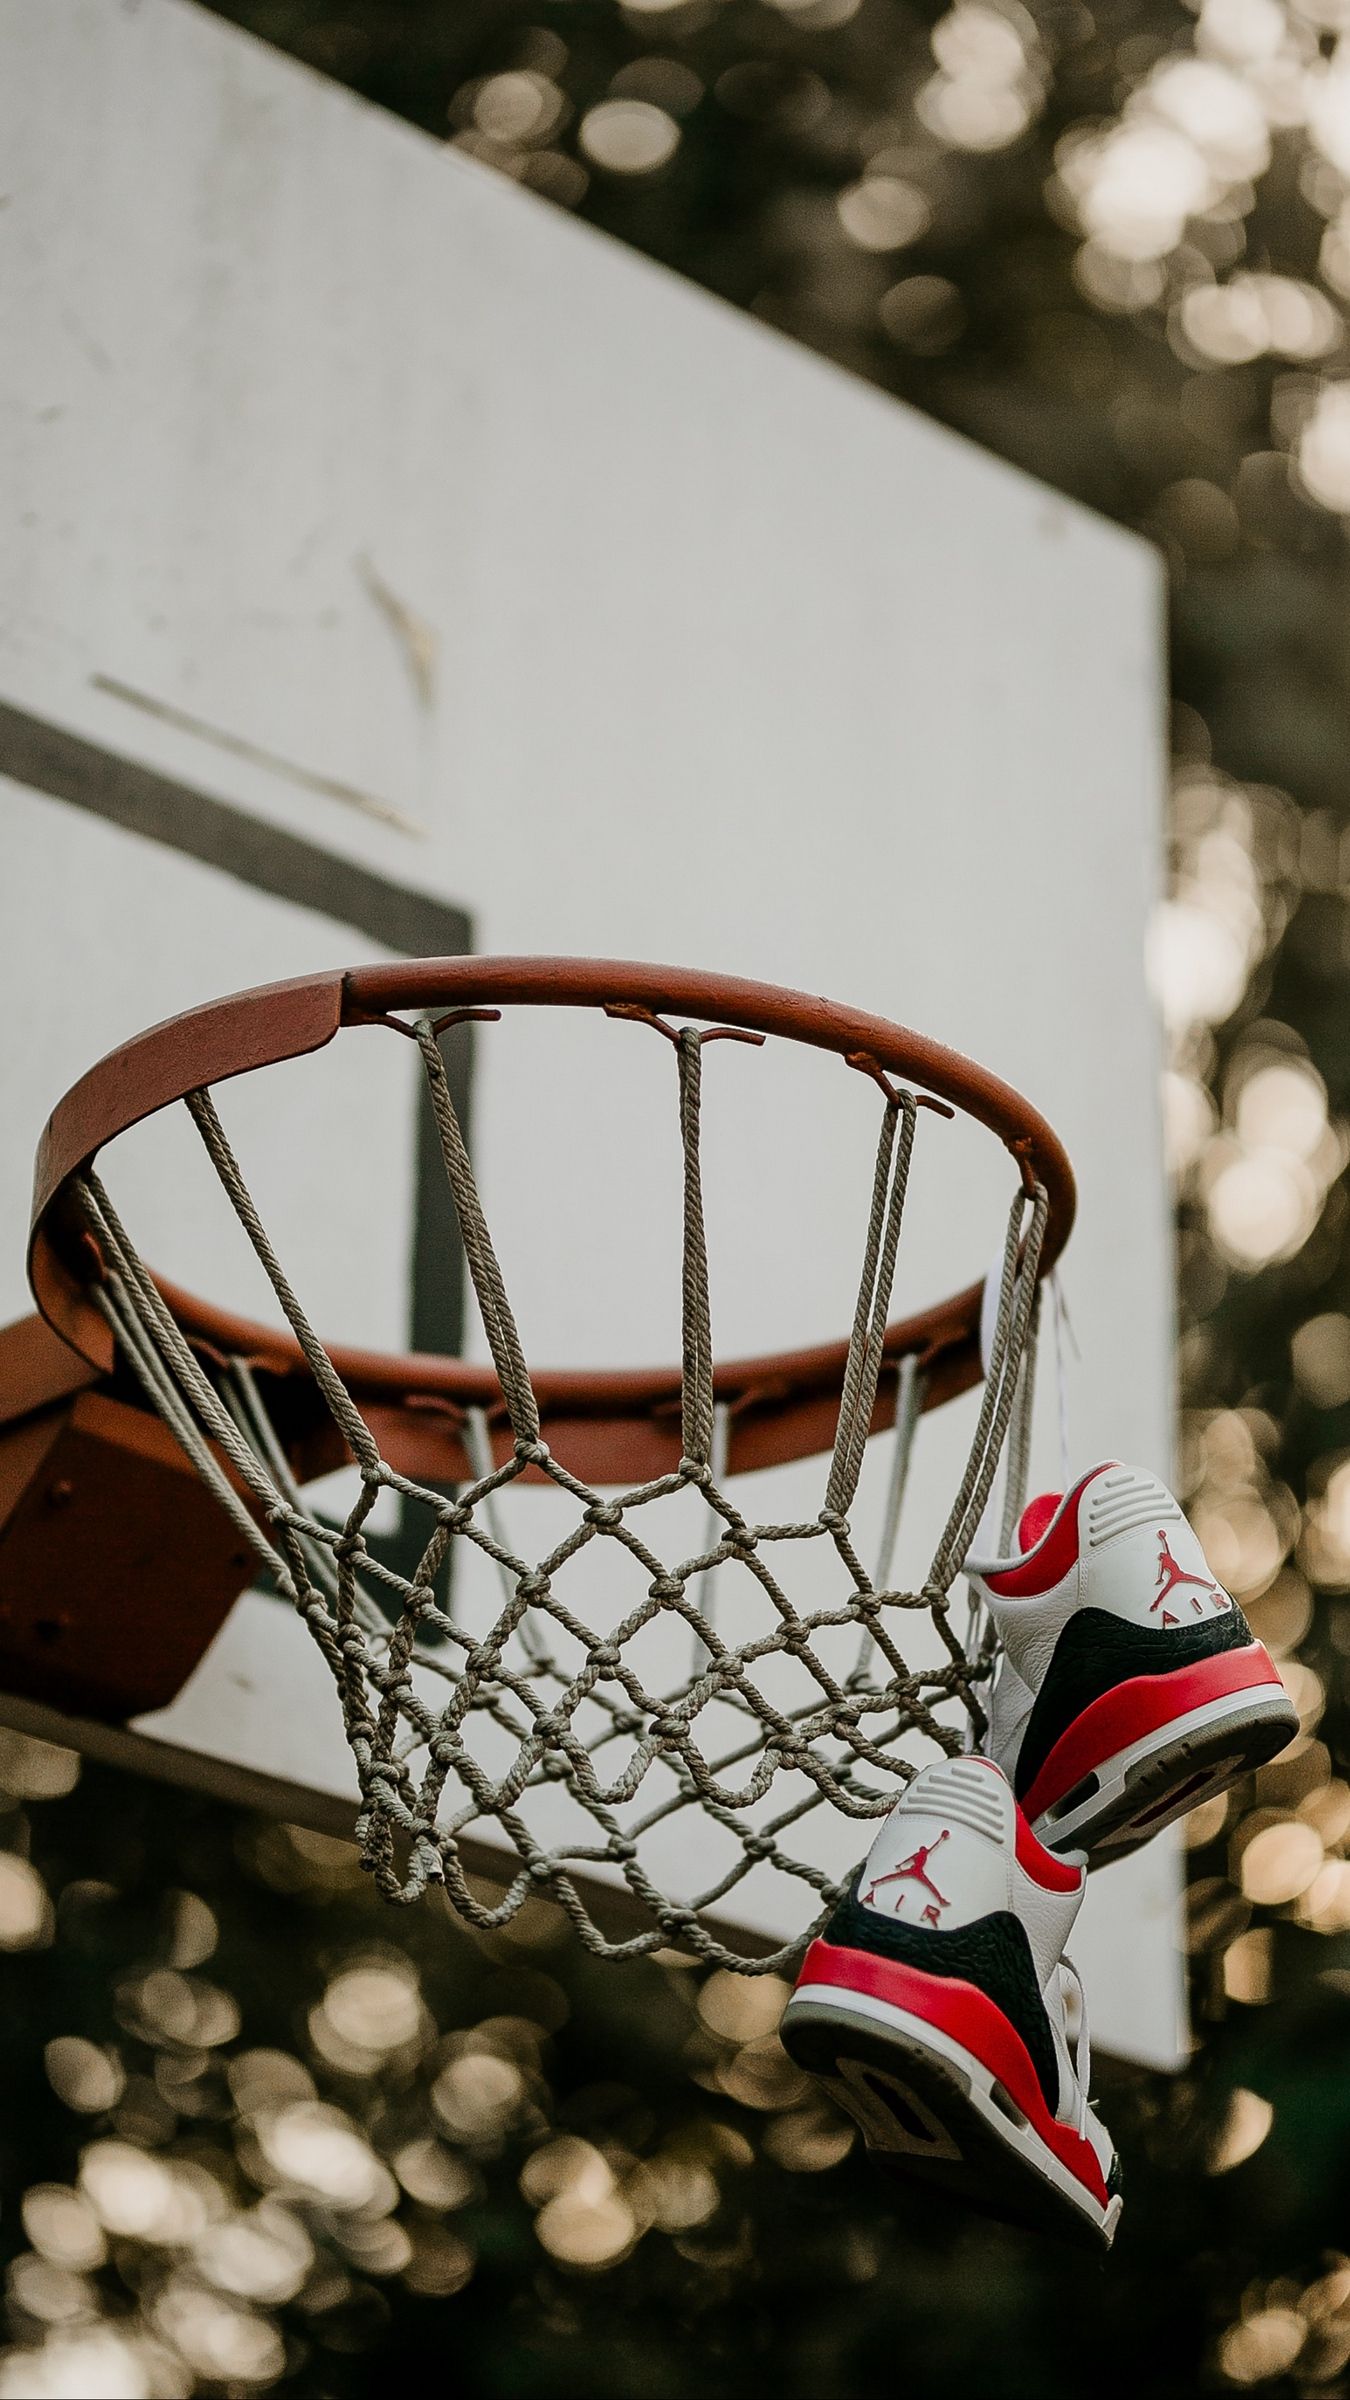 A pair of shoes hanging from the rim - Basketball